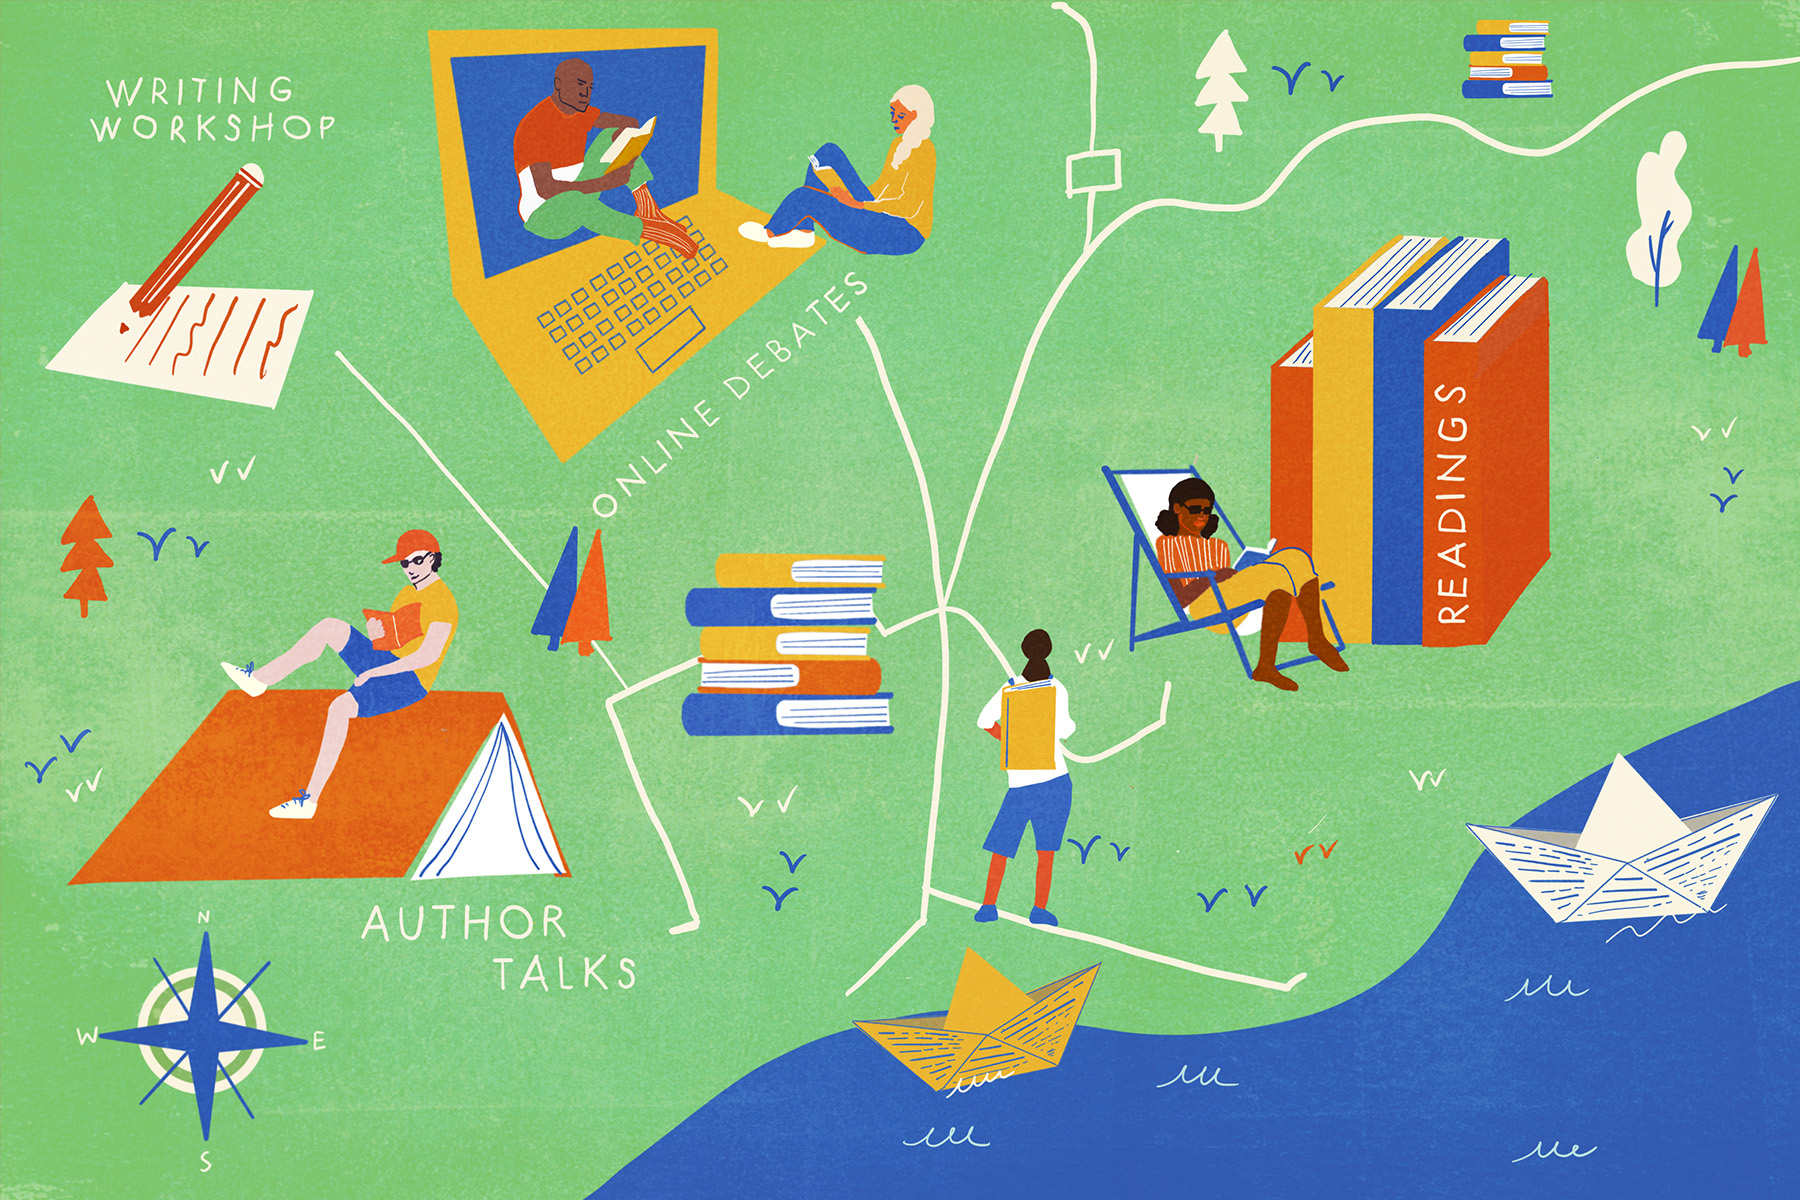 An illustration of a map representing images of readers and books